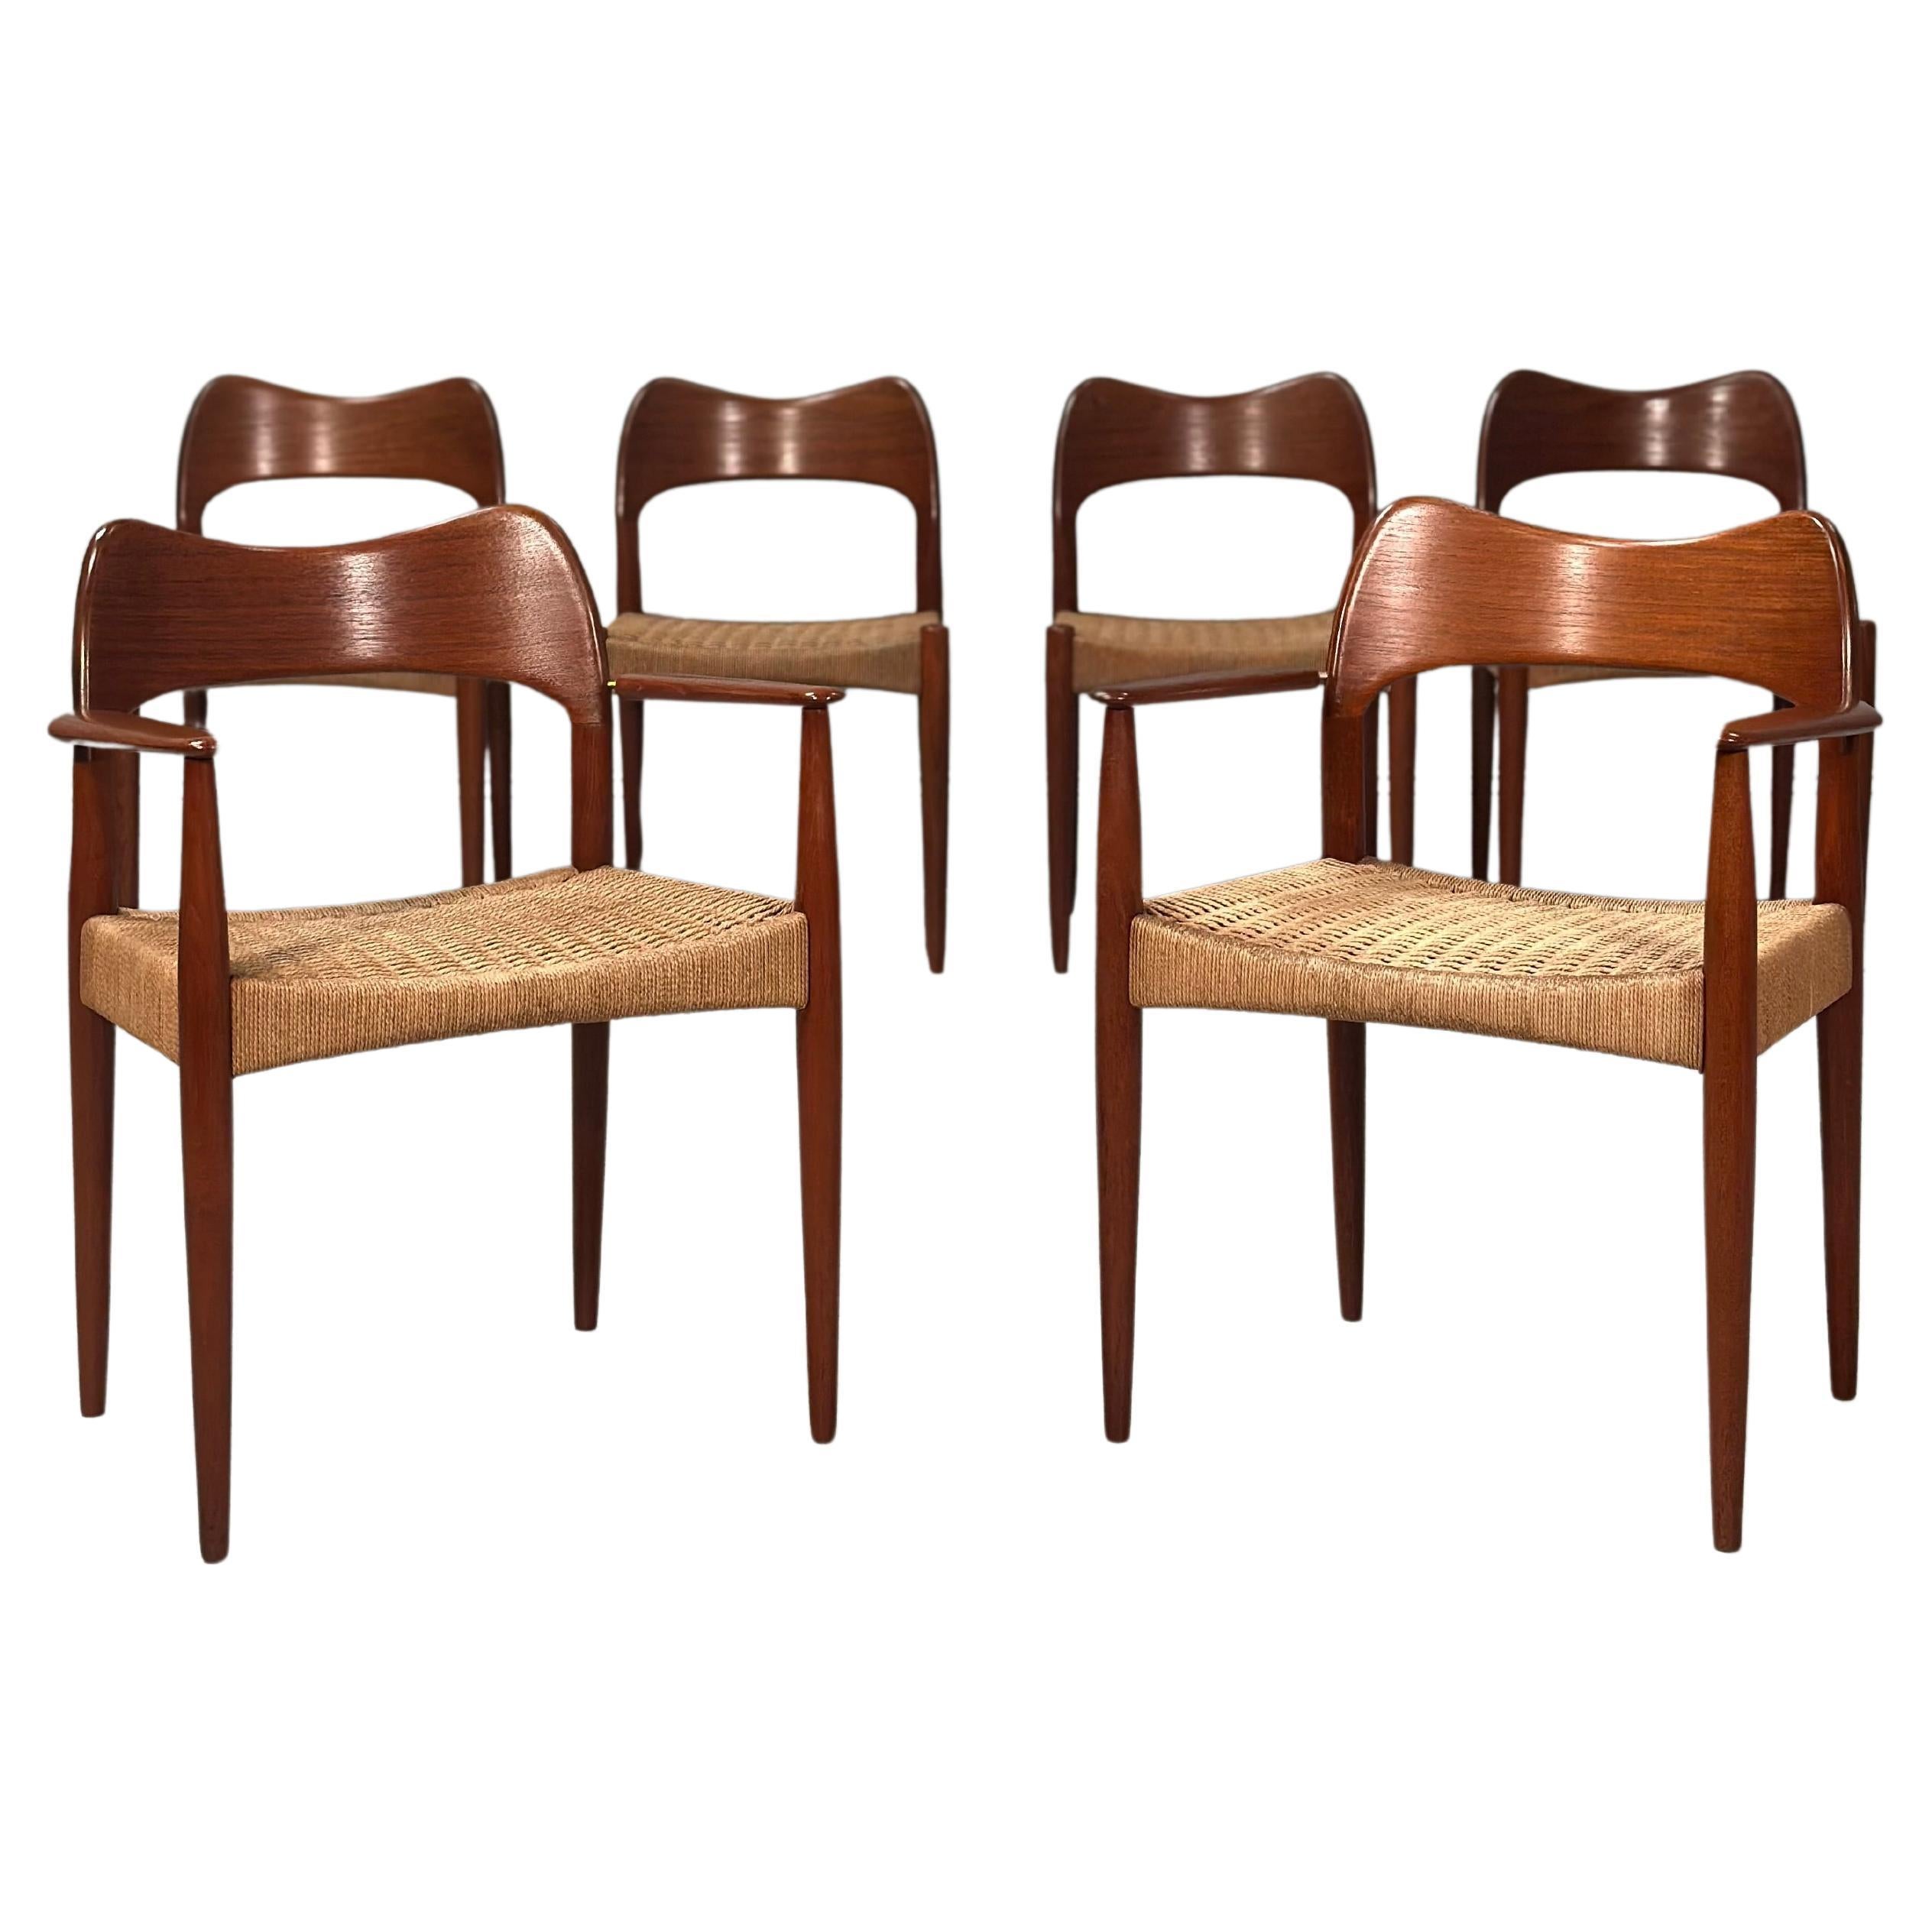 Set of 6 Danish Teak And Paper Cord Dining Chairs Designed By Arne Hovmand Olsen